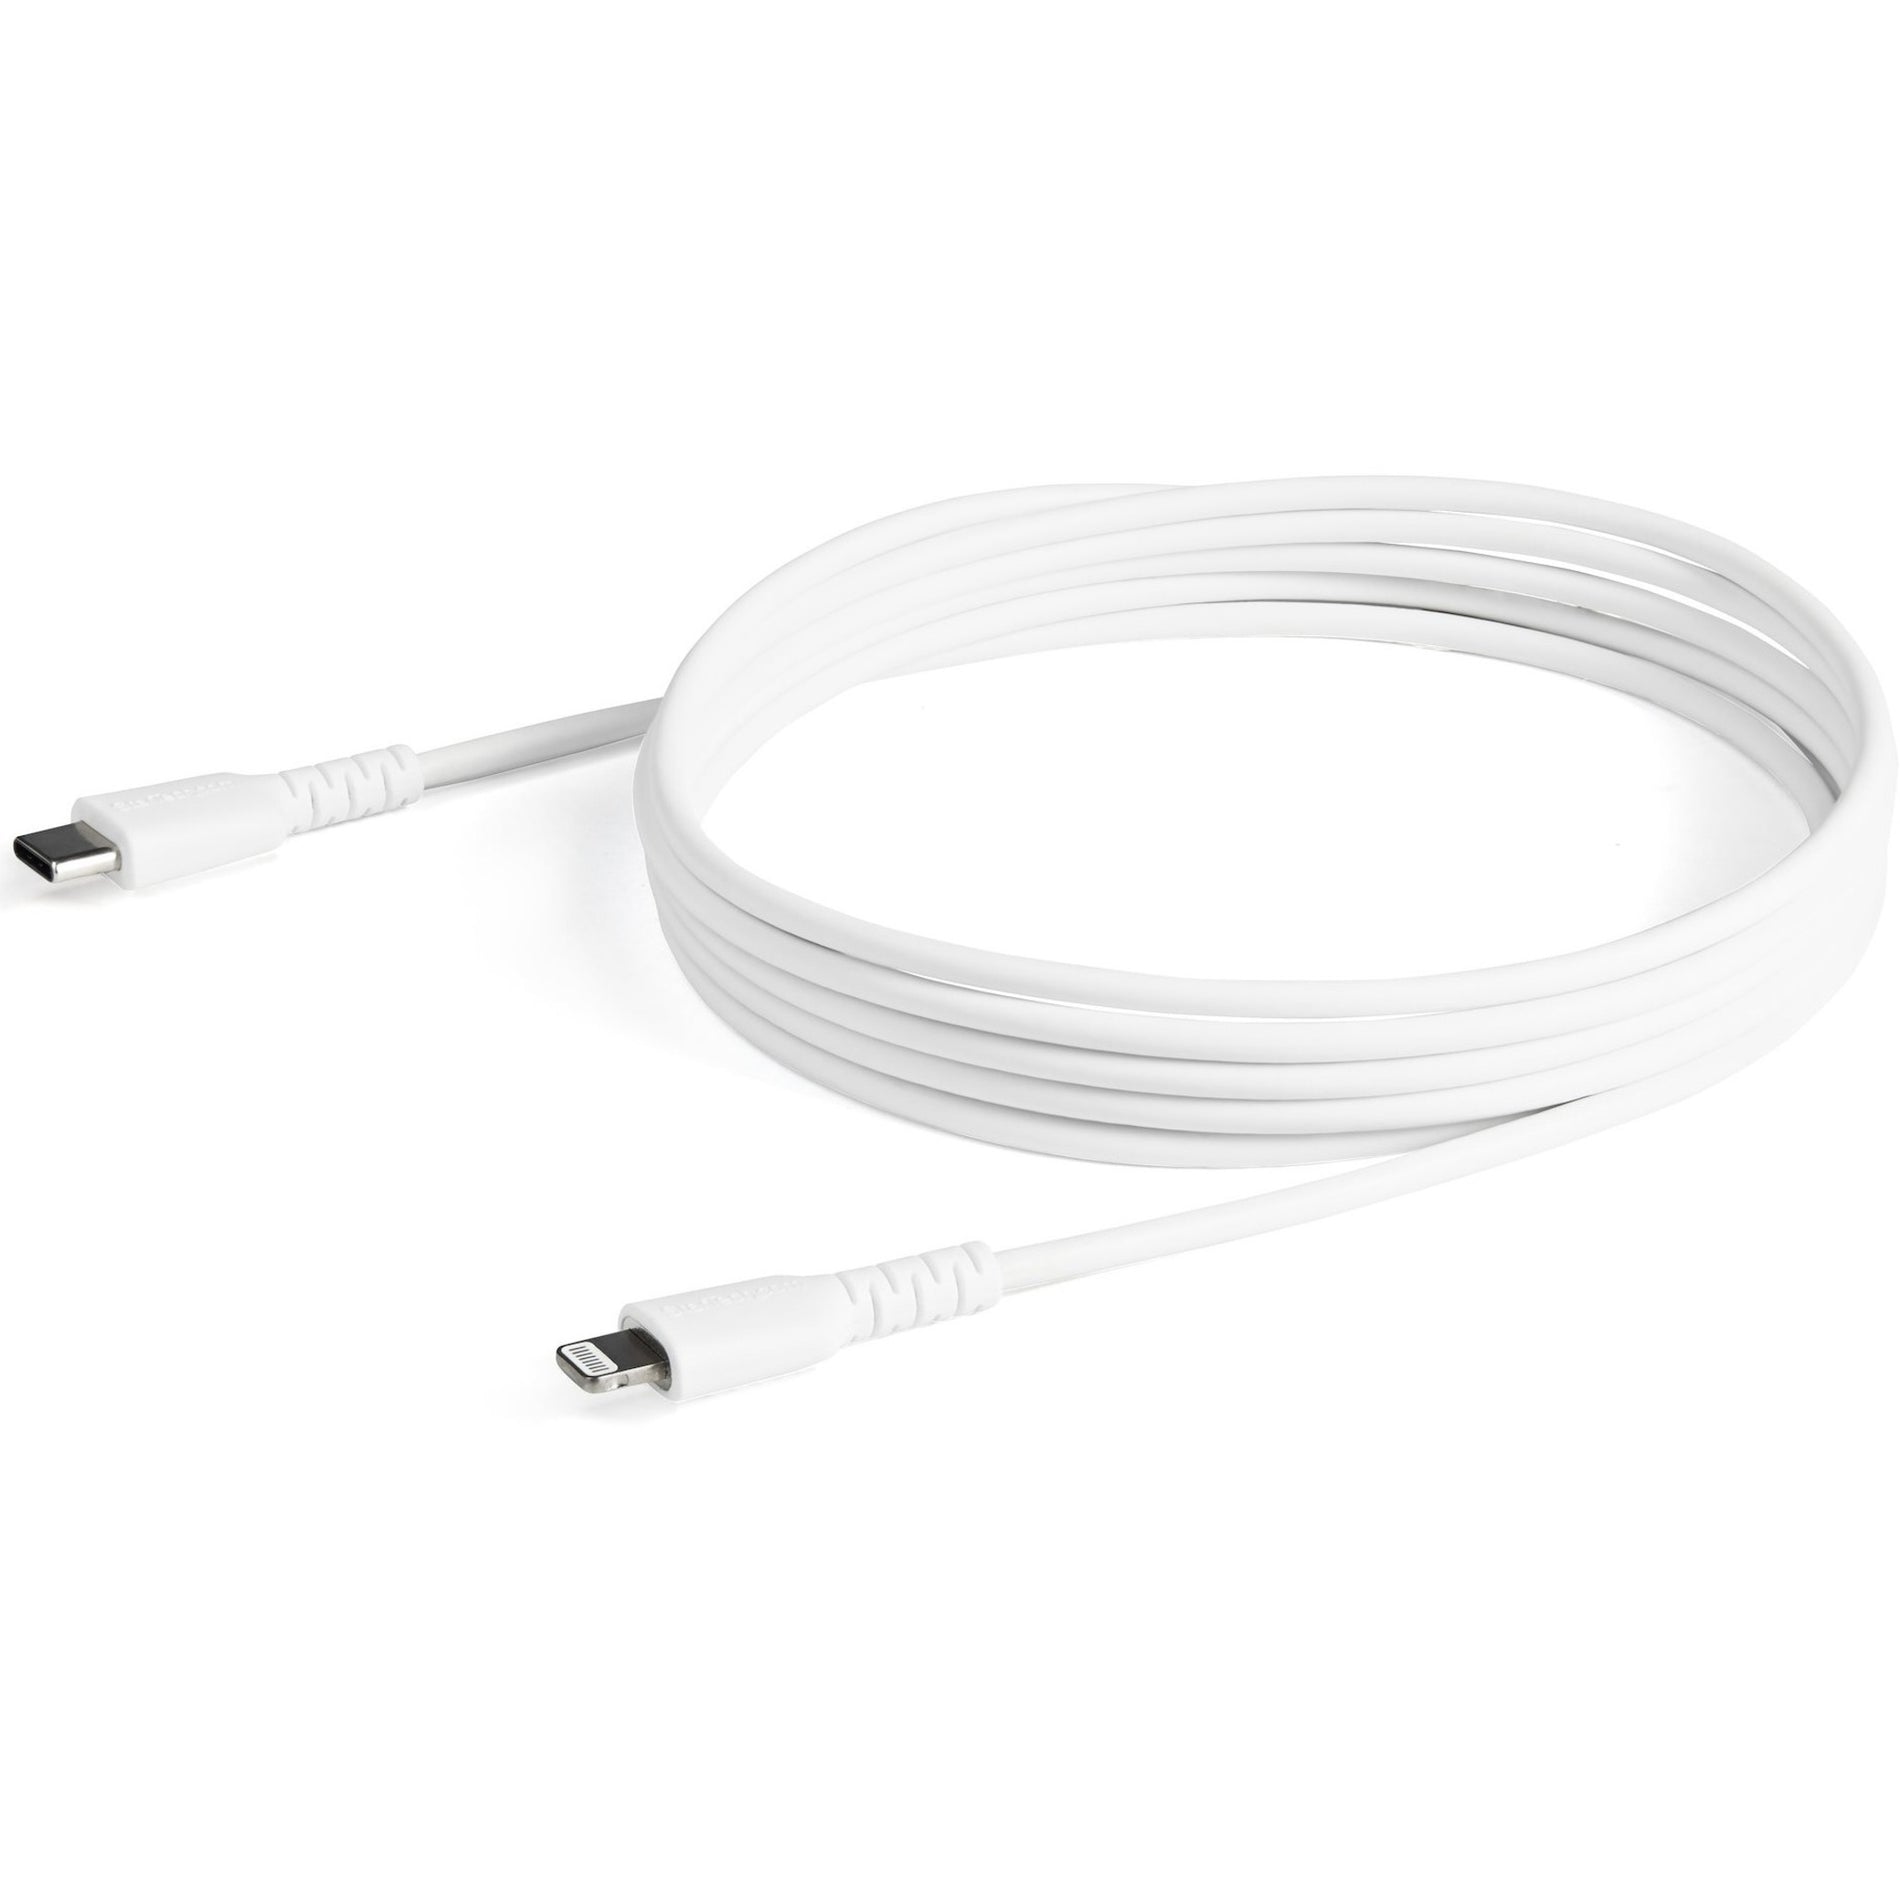 StarTech.com RUSBCLTMM2MW 2m/6.6ft USB C to Lightning Cable - MFi Certified, Heavy Duty Lightning Cable, White, Durable USB Charging Cable